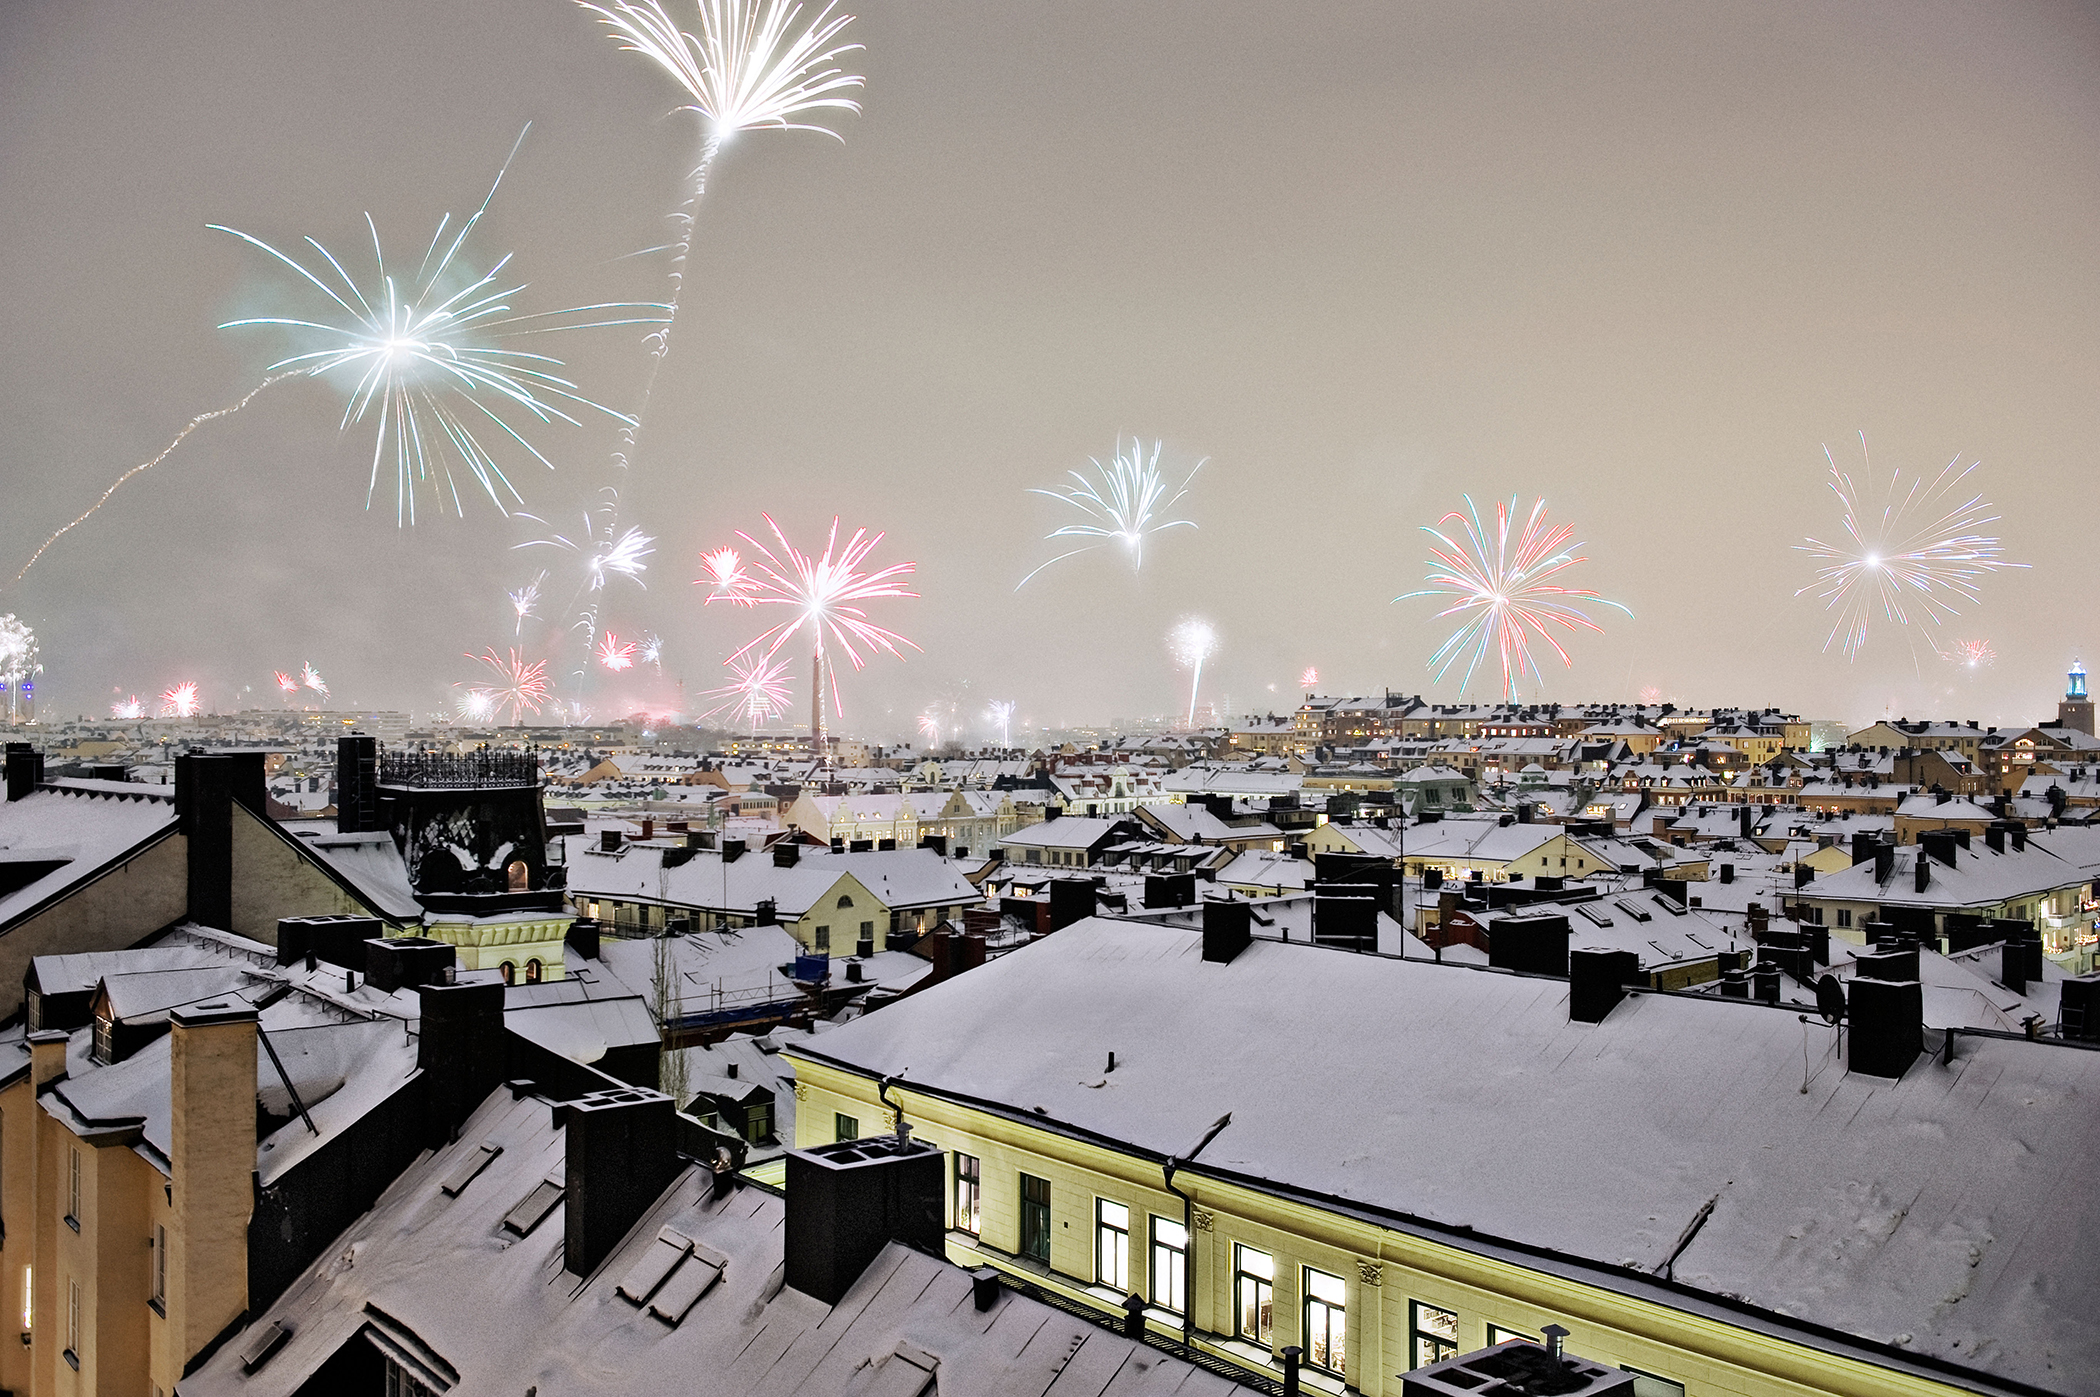 Stockholm on New Year's Eve